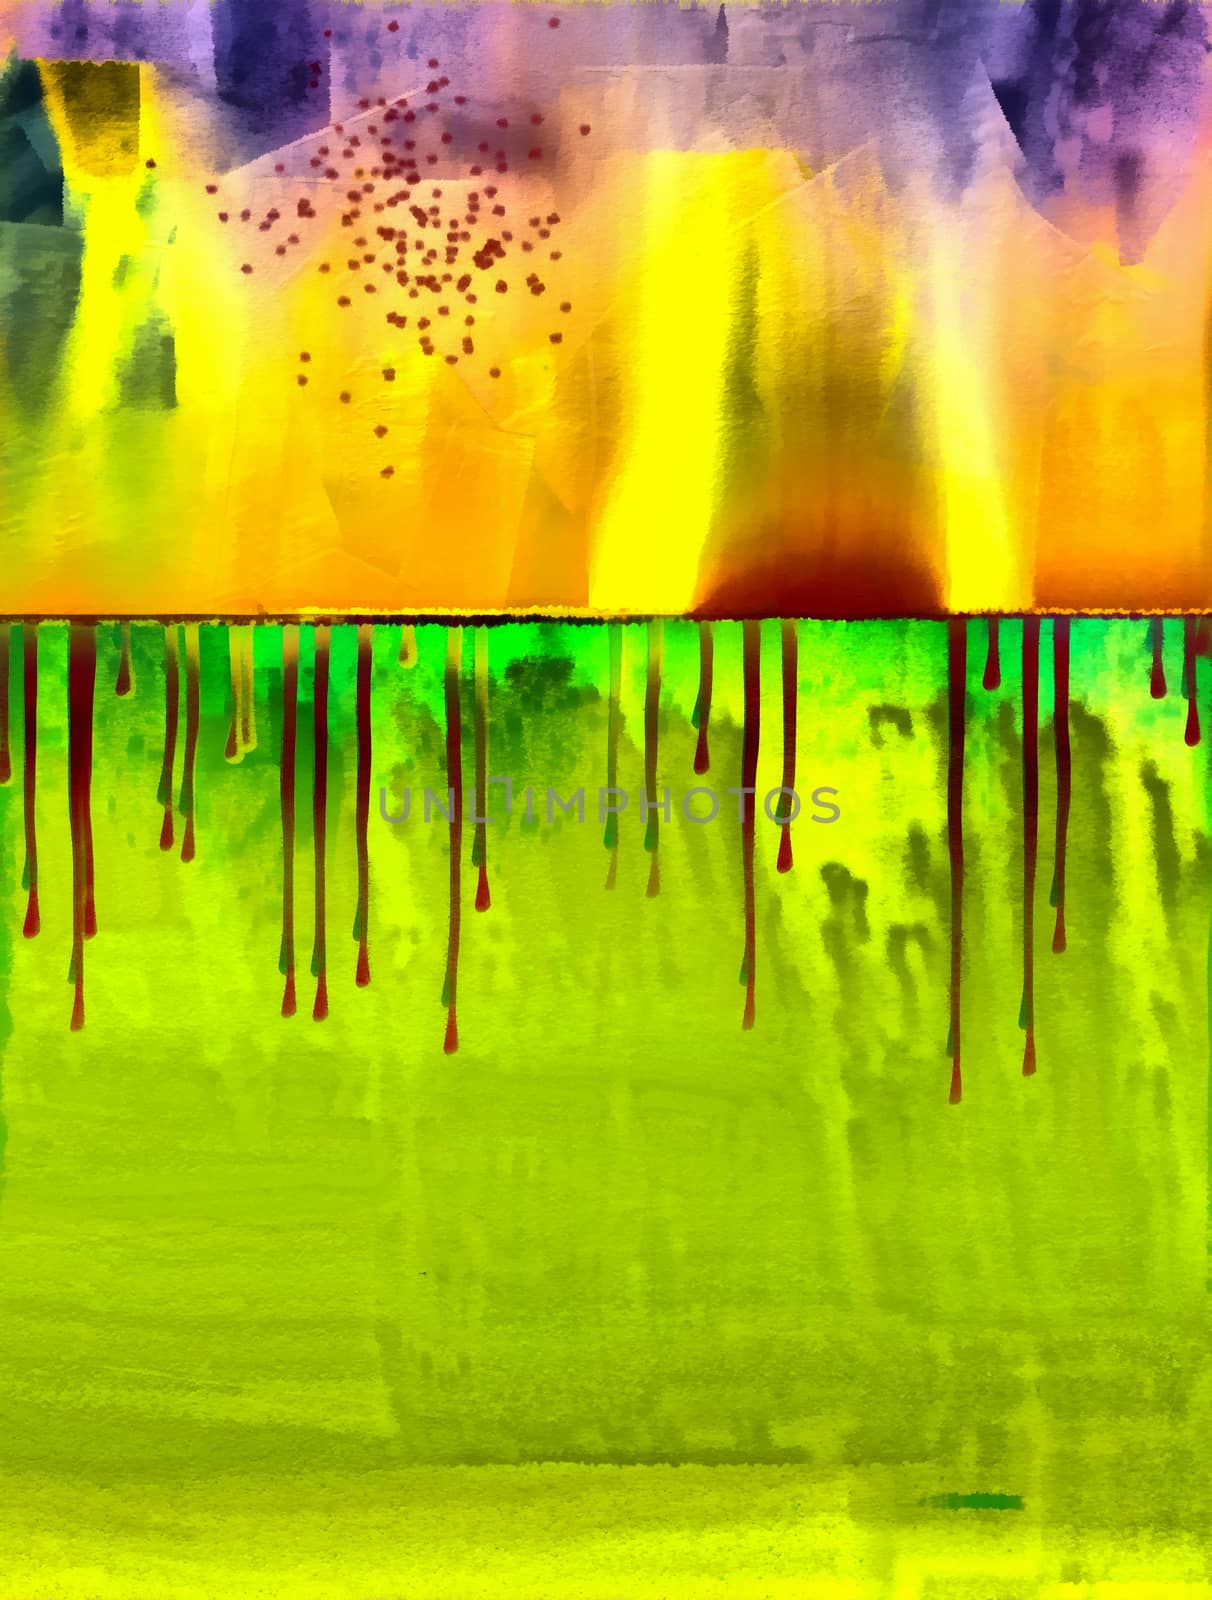 Vivid Abstract Painting. Paint drops. 3D rendering